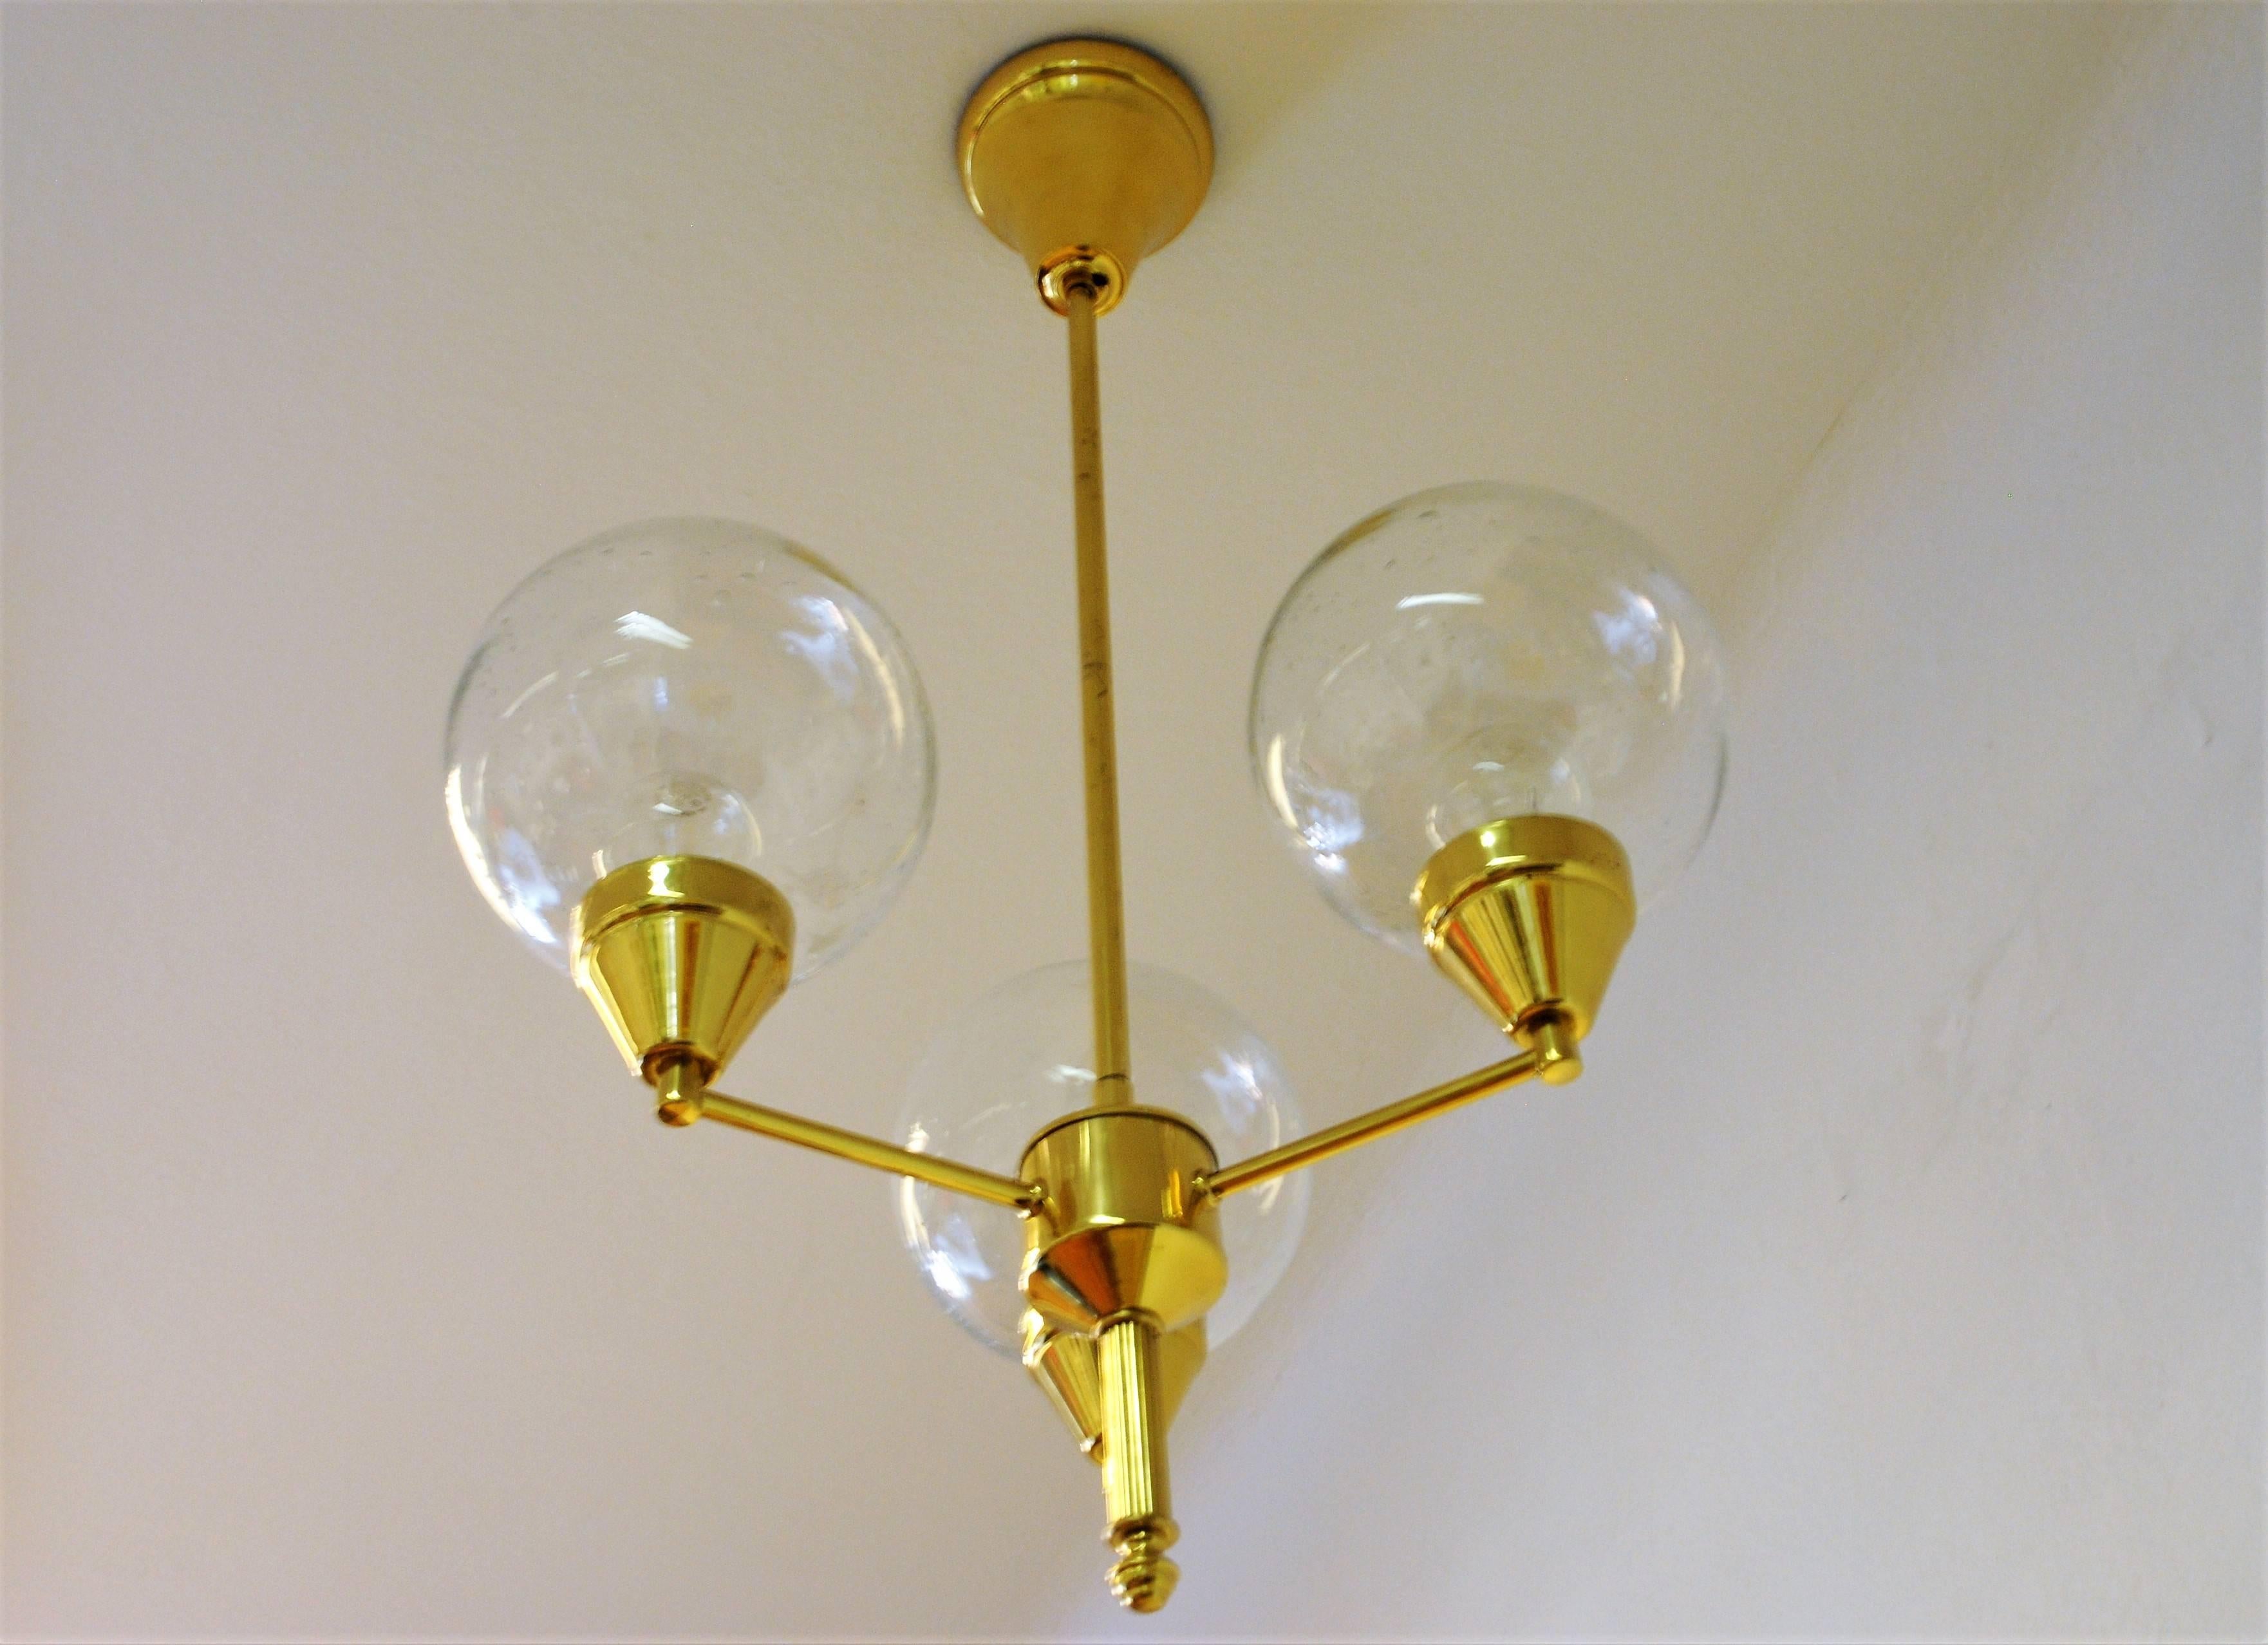 Brass ceiling lamp with three clear glass domes in upward position. Probably a Swedish lamp from circa 1960s. The glass domes have small closed air bubbles. Brass base. Lovely vintage lamp. Signed AJH.
Measure: Diameter of glass dome 16 cm. Height